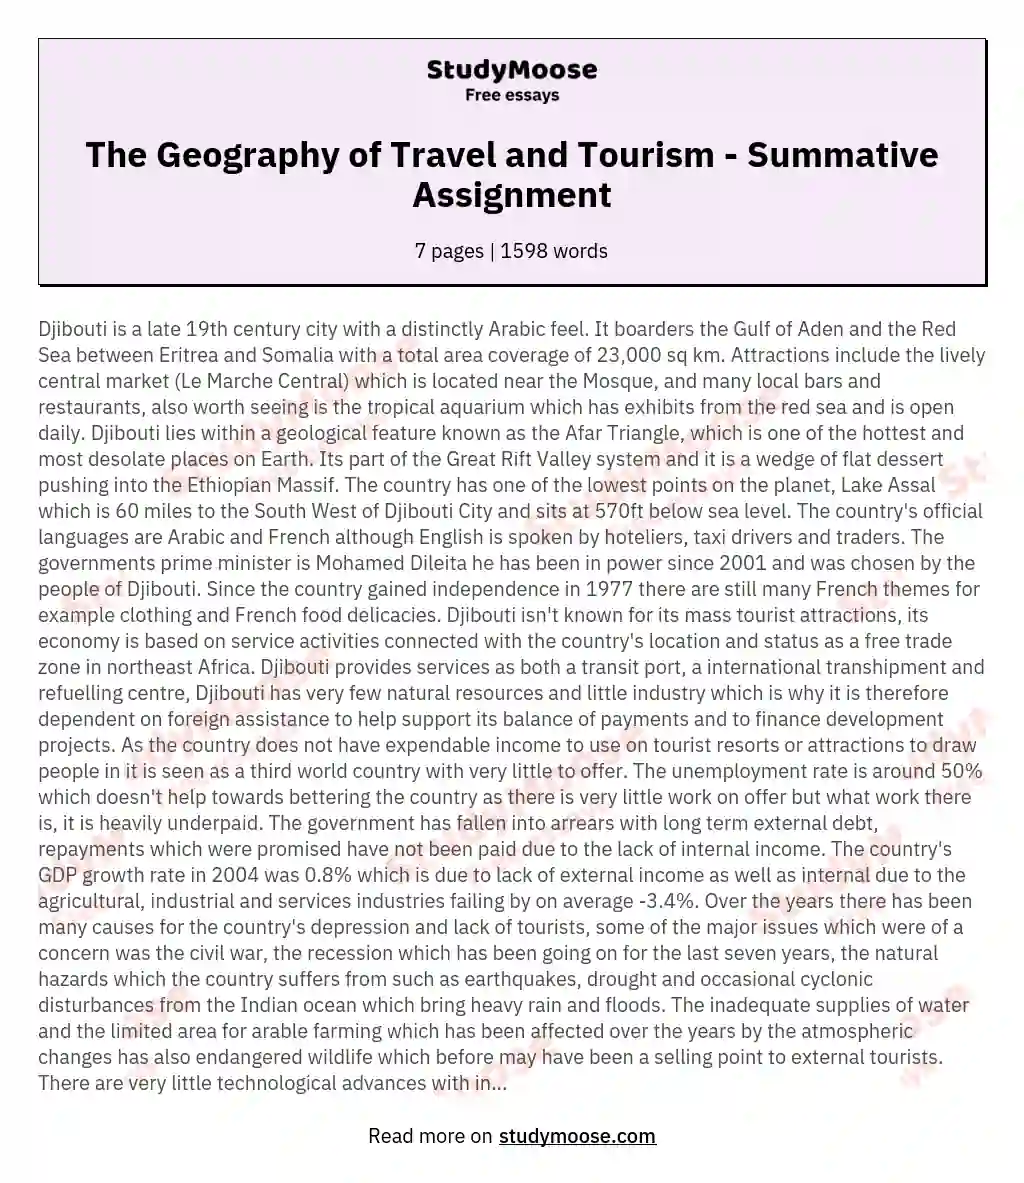 The Geography of Travel and Tourism - Summative Assignment